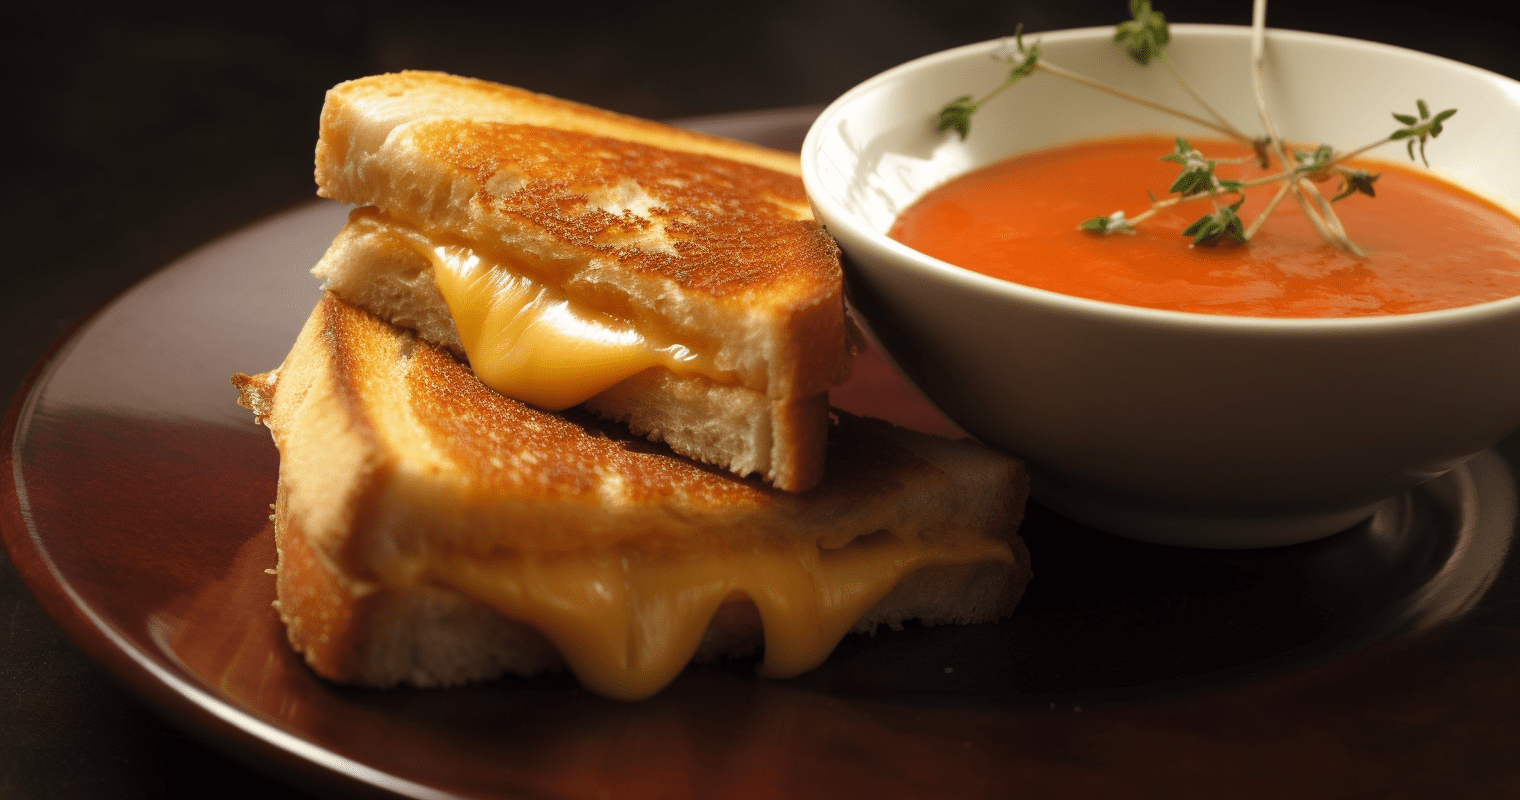 Variations of Grilled Cheese